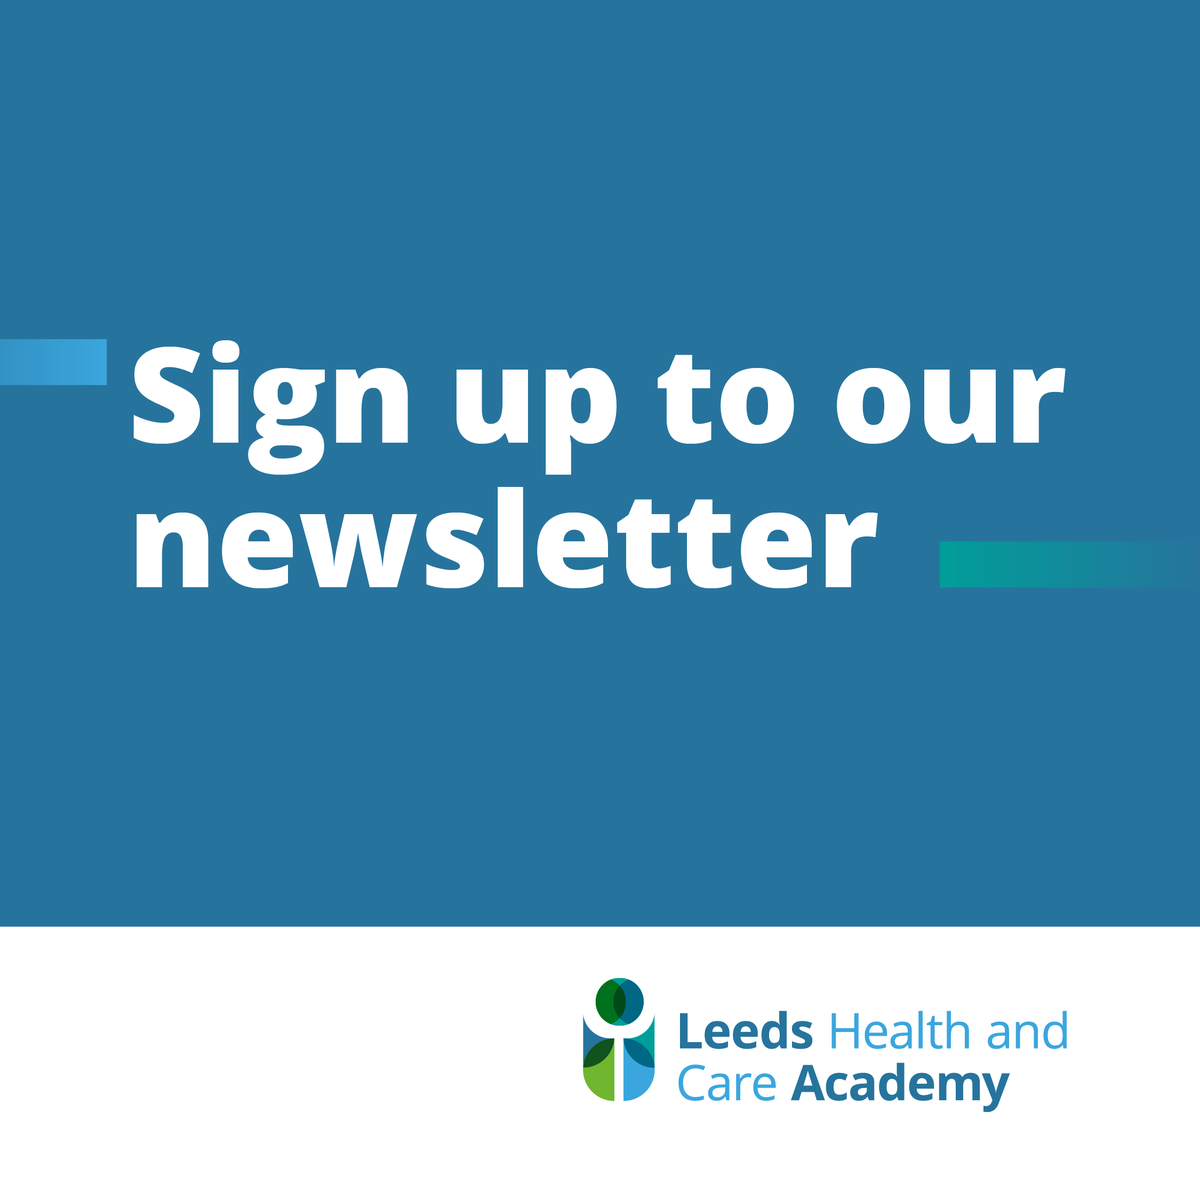 Our October newsletter will be sent out later this week! If you'd like to be the first to receive the latest Academy updates and news of our upcoming training and development opportunities, sign up here: leedshealthandcareacademy.org/contact-us/